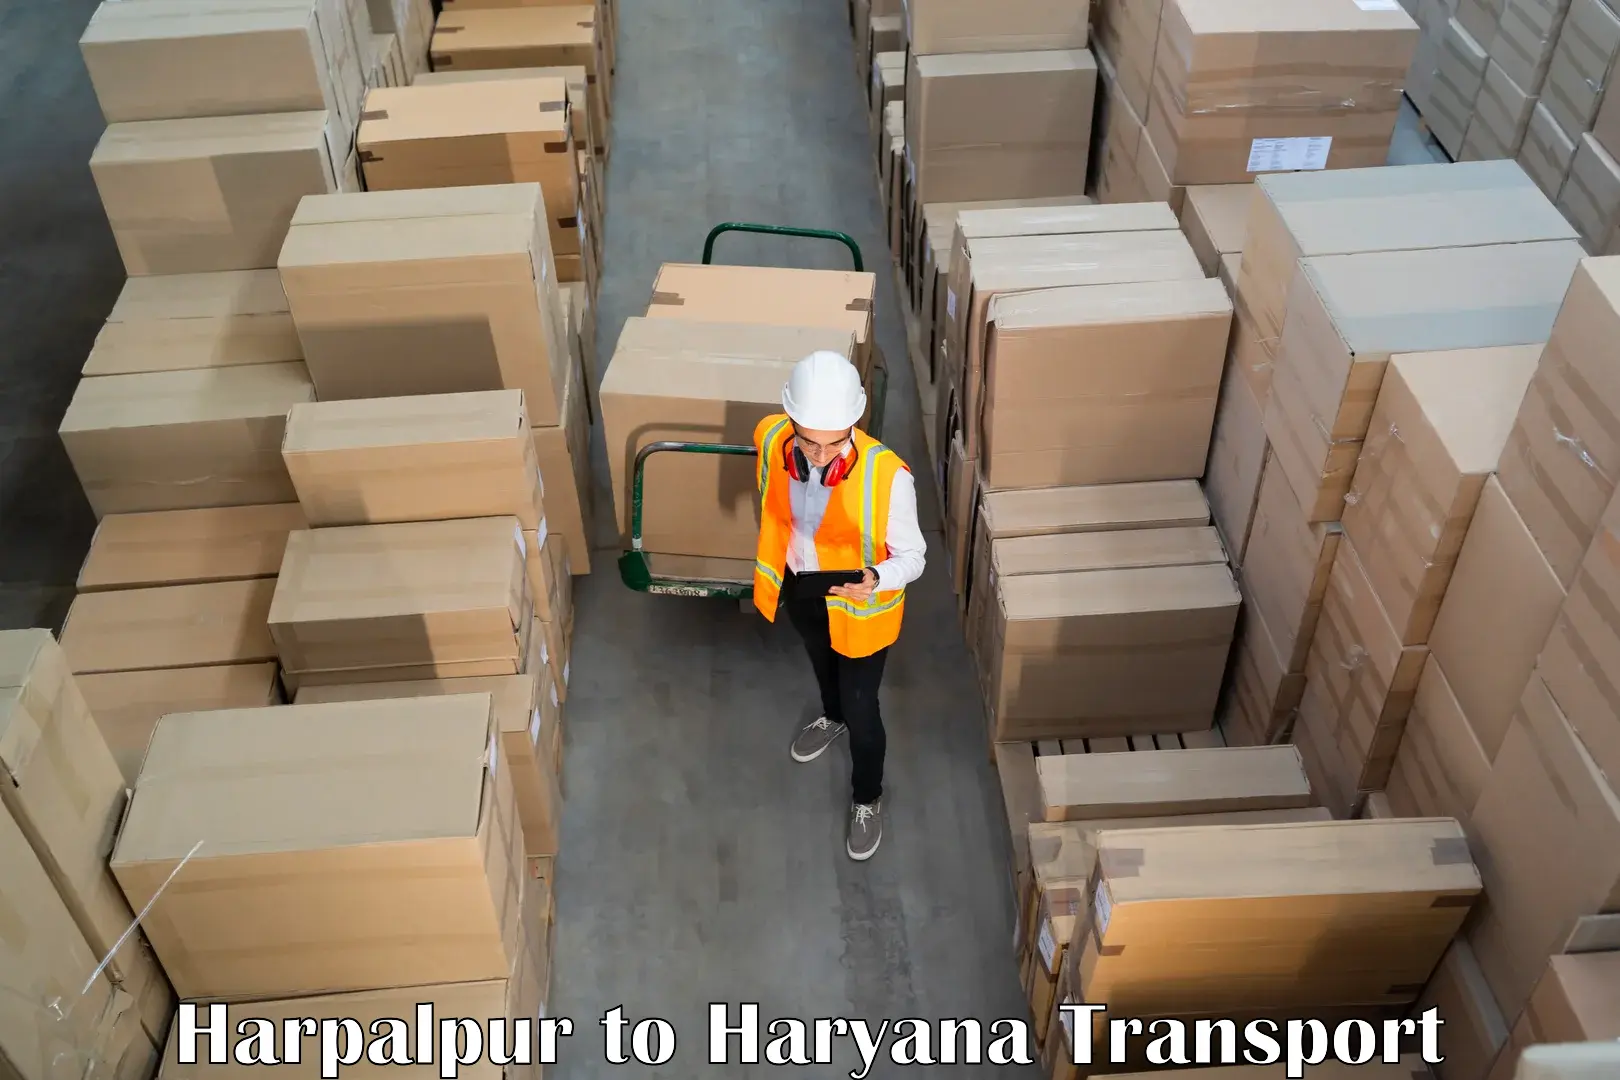 Transport shared services Harpalpur to Sonipat